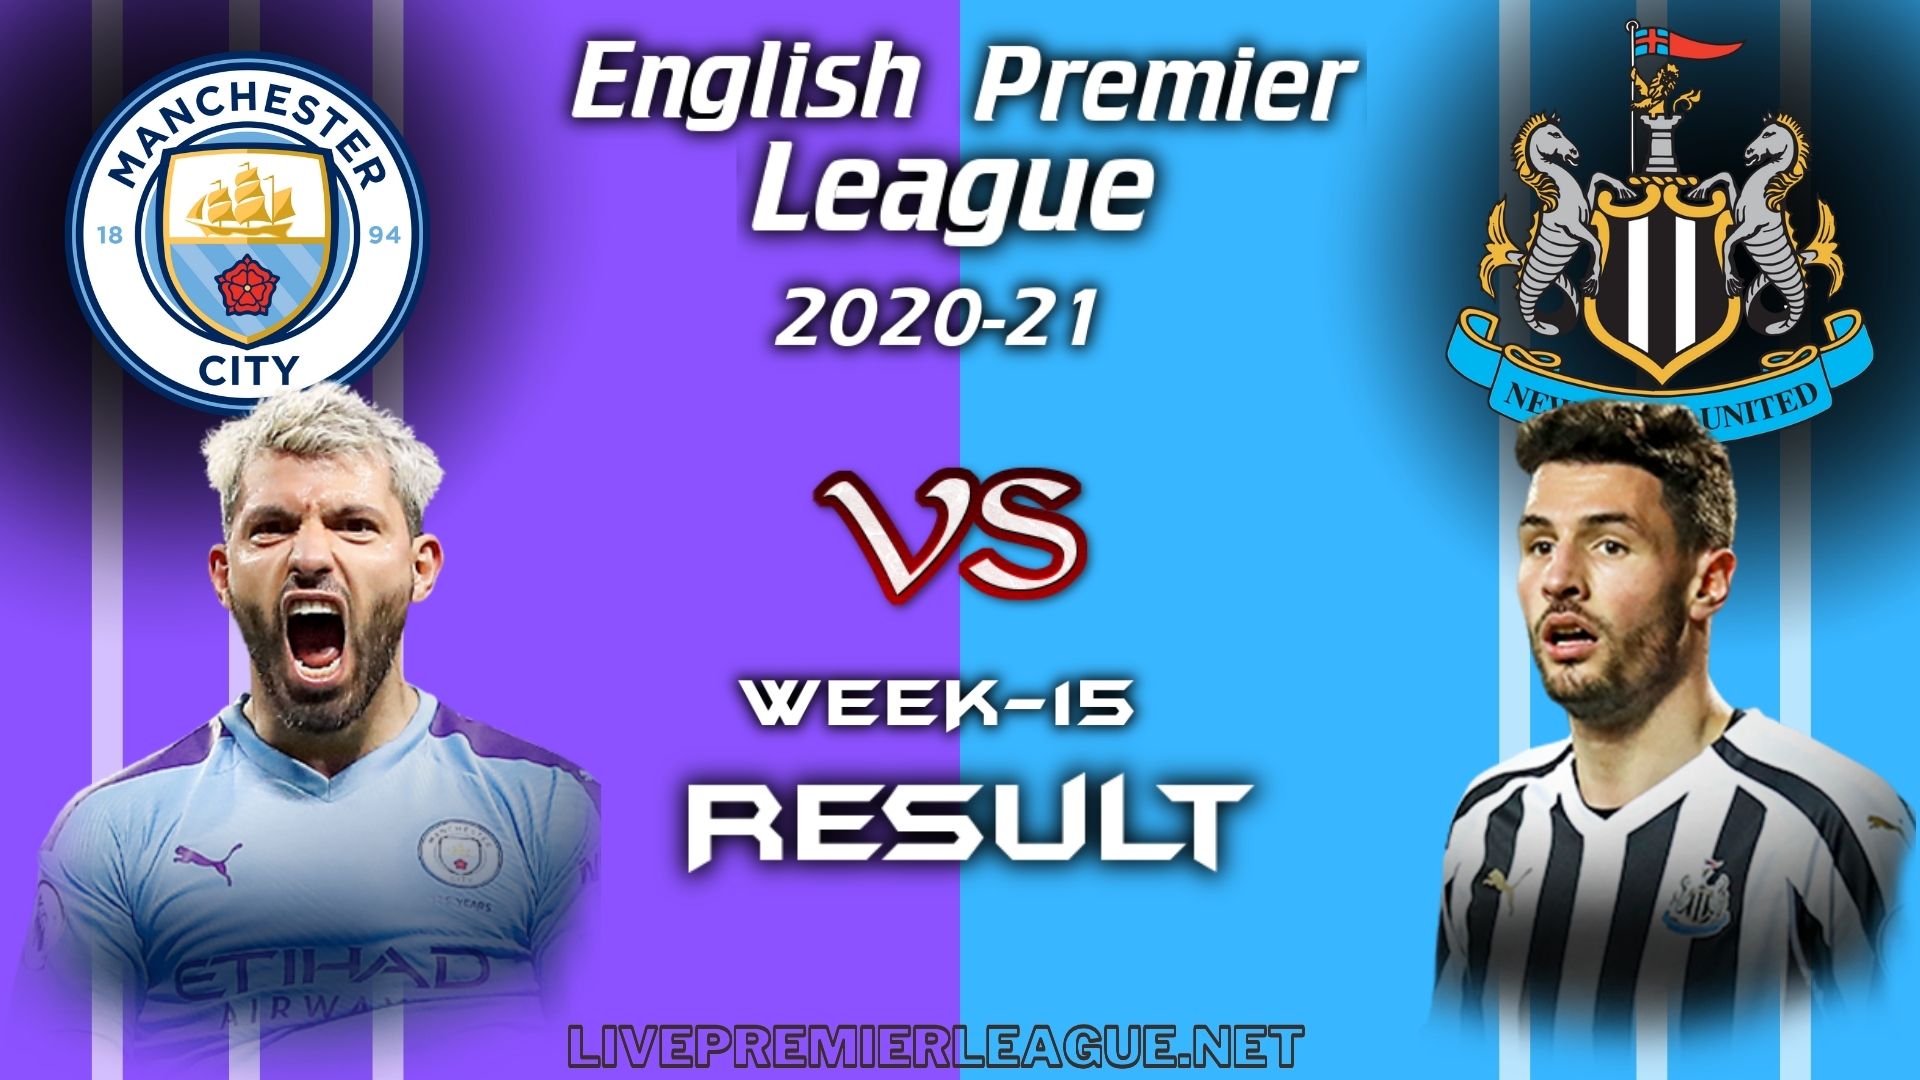 Manchester City Vs Newcastle United | EPL Week 15 Result 2020